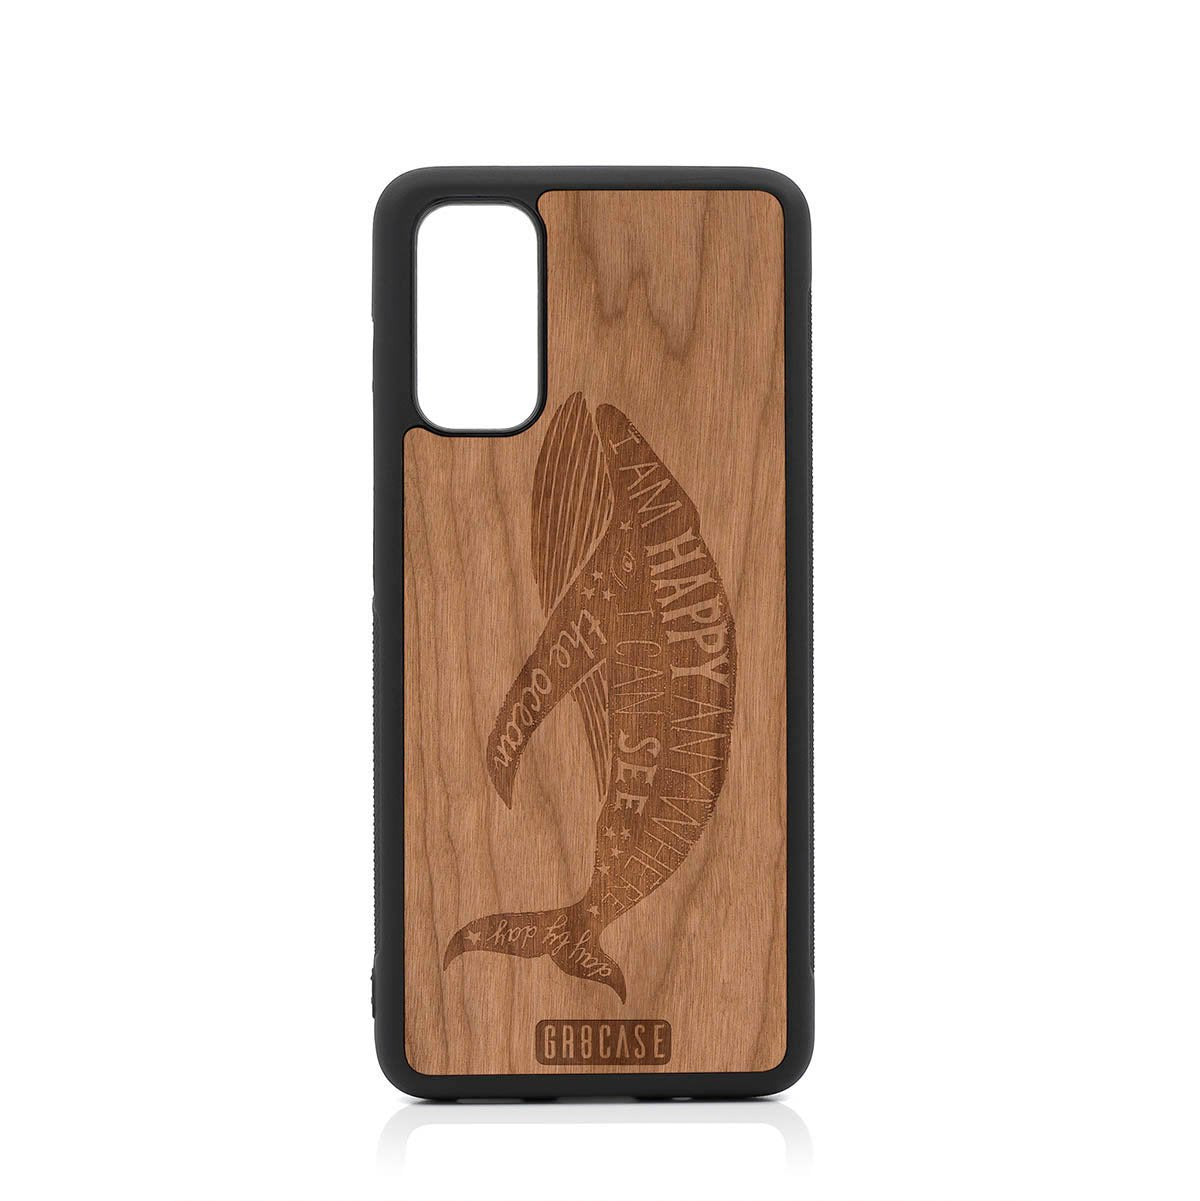 I'm Happy Anywhere I Can See The Ocean (Whale) Design Wood Case For Samsung Galaxy S20 FE 5G